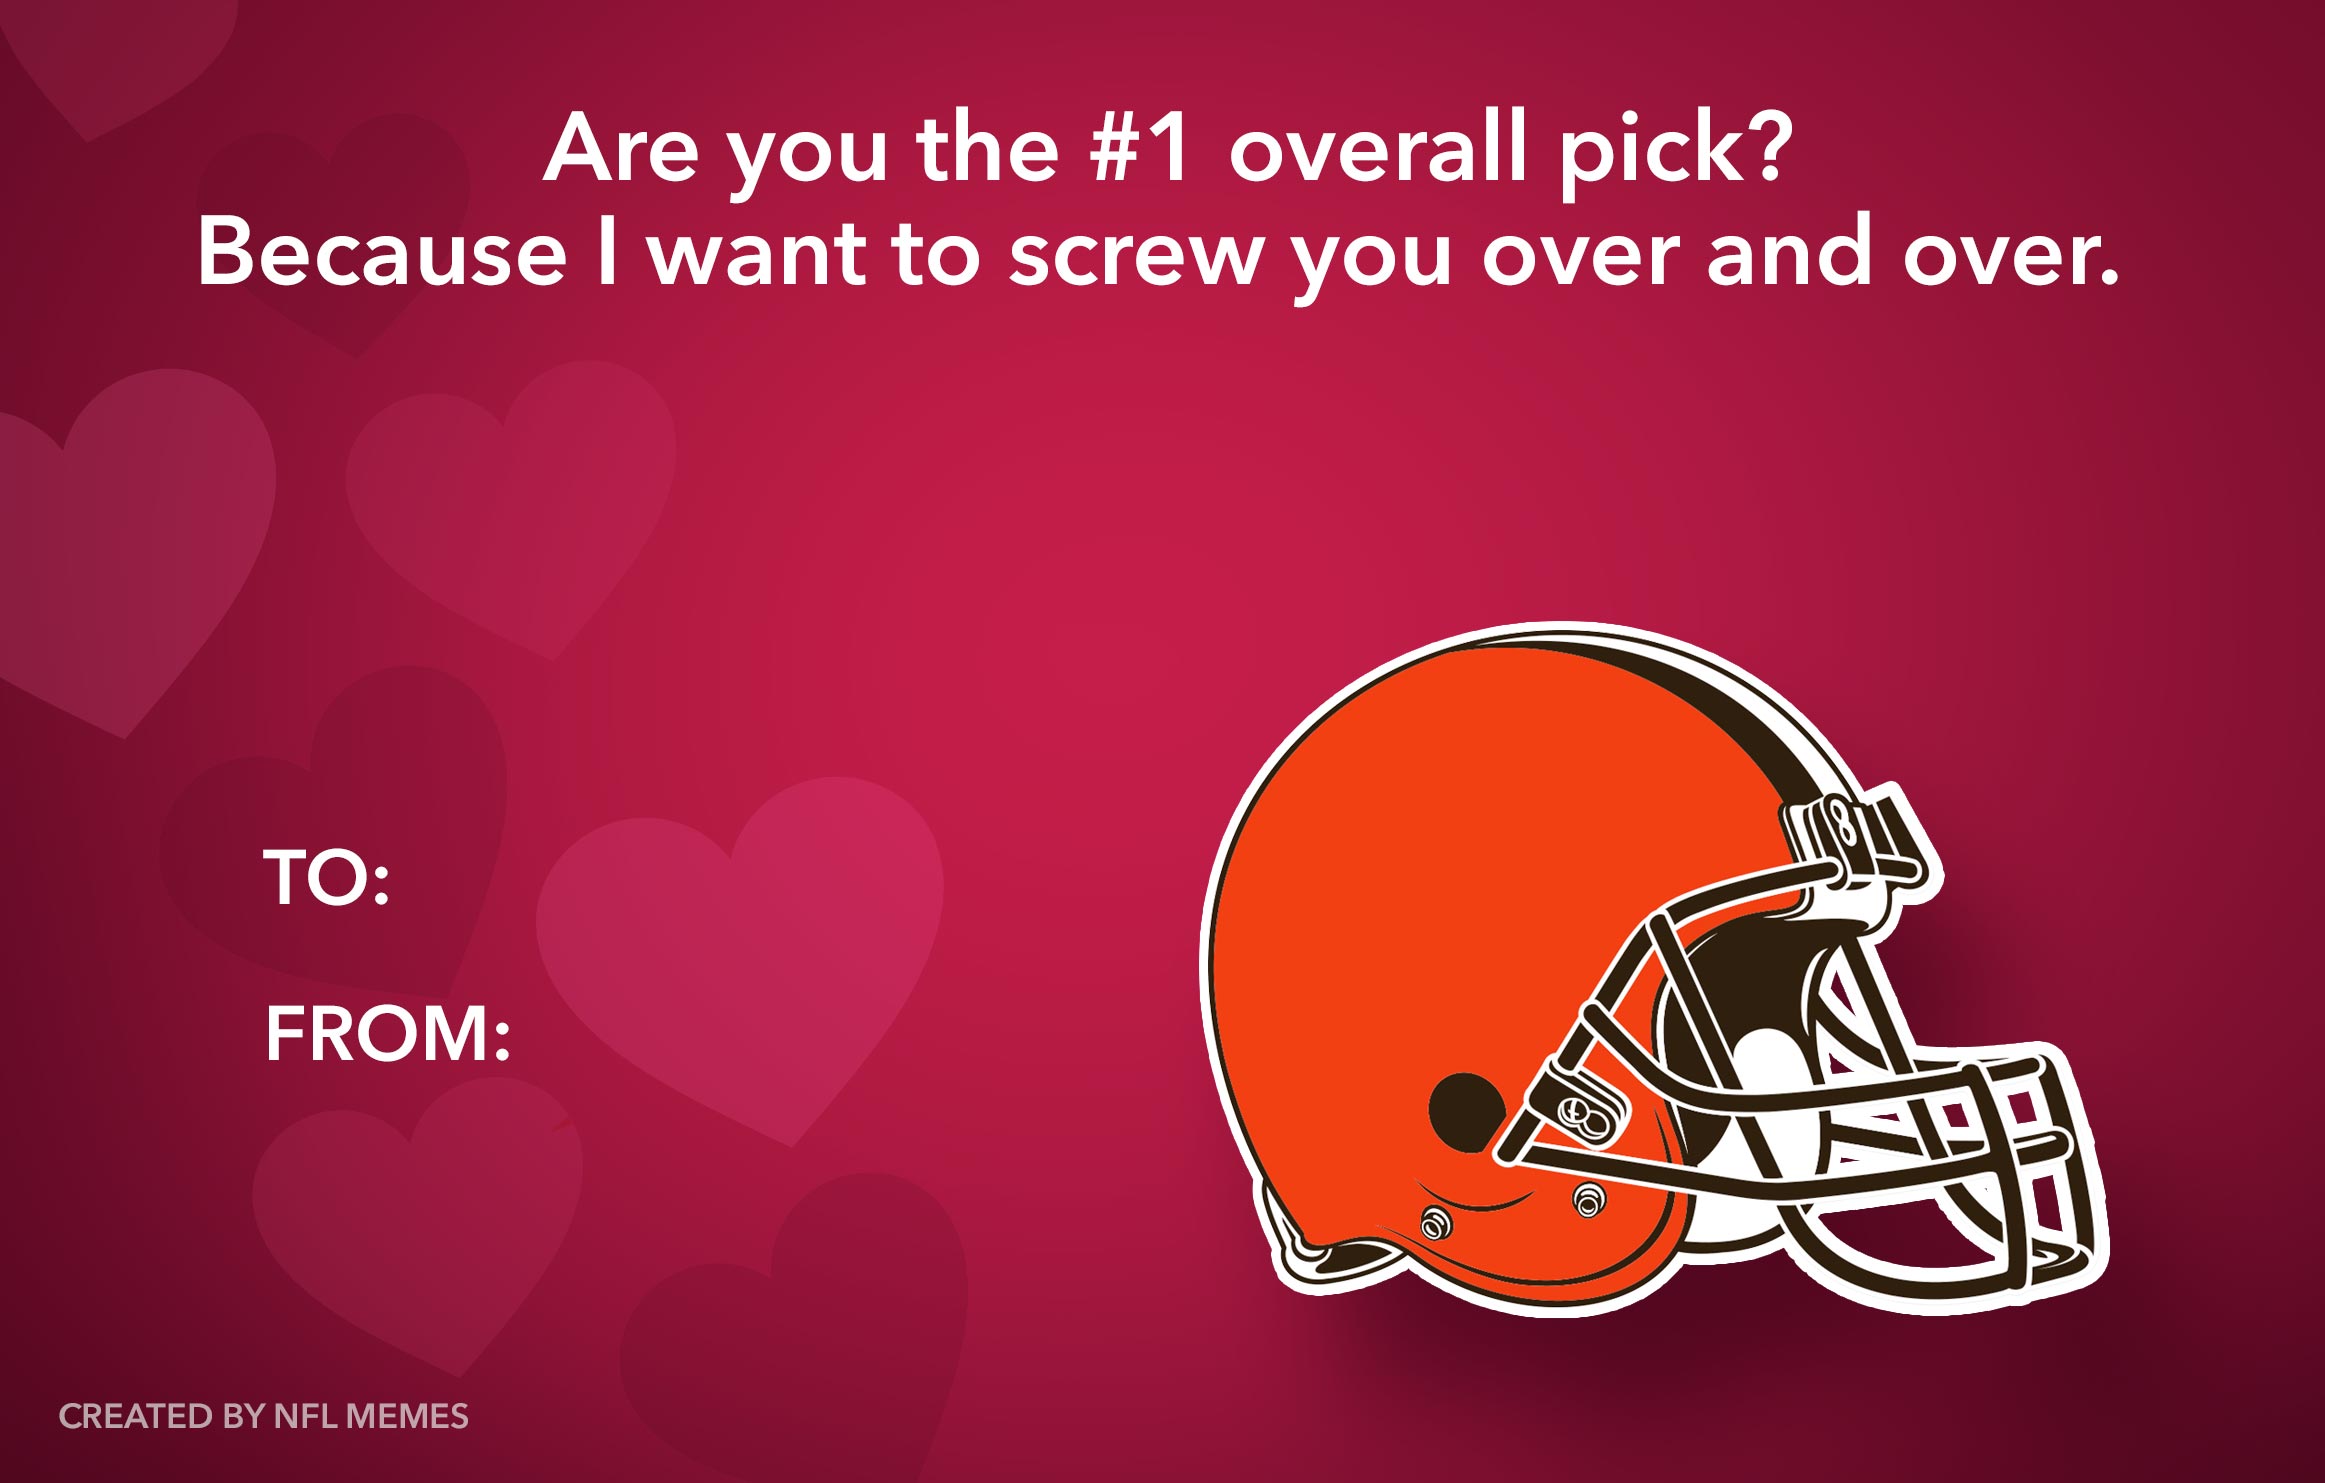 Here’s This Year’s Batch Of Hilarious NFL-Themed Valentine’s Day Cards (PICS)